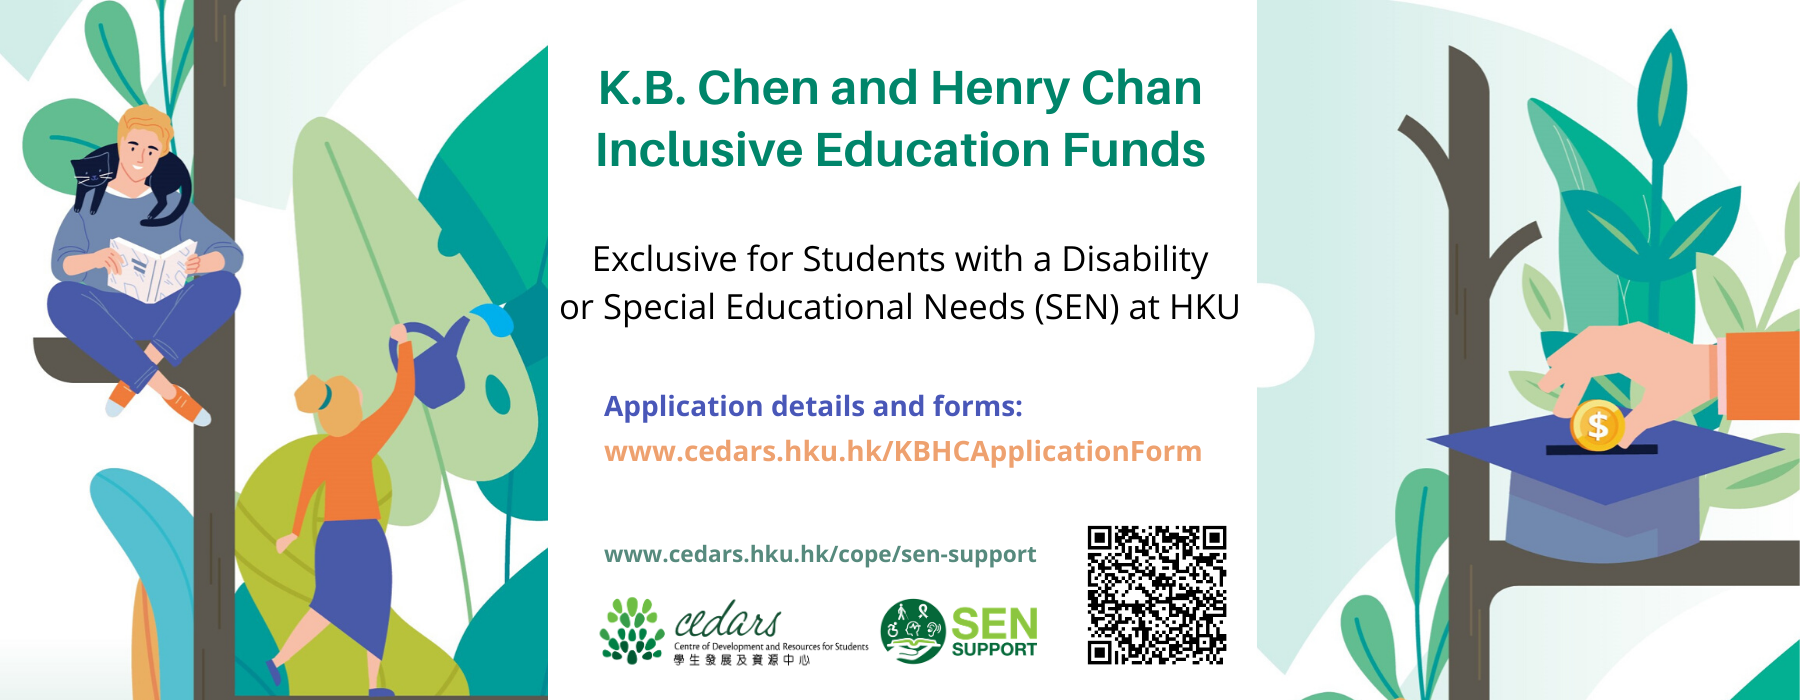 K.B. Chen and Henry Chan Inclusive Education Fund